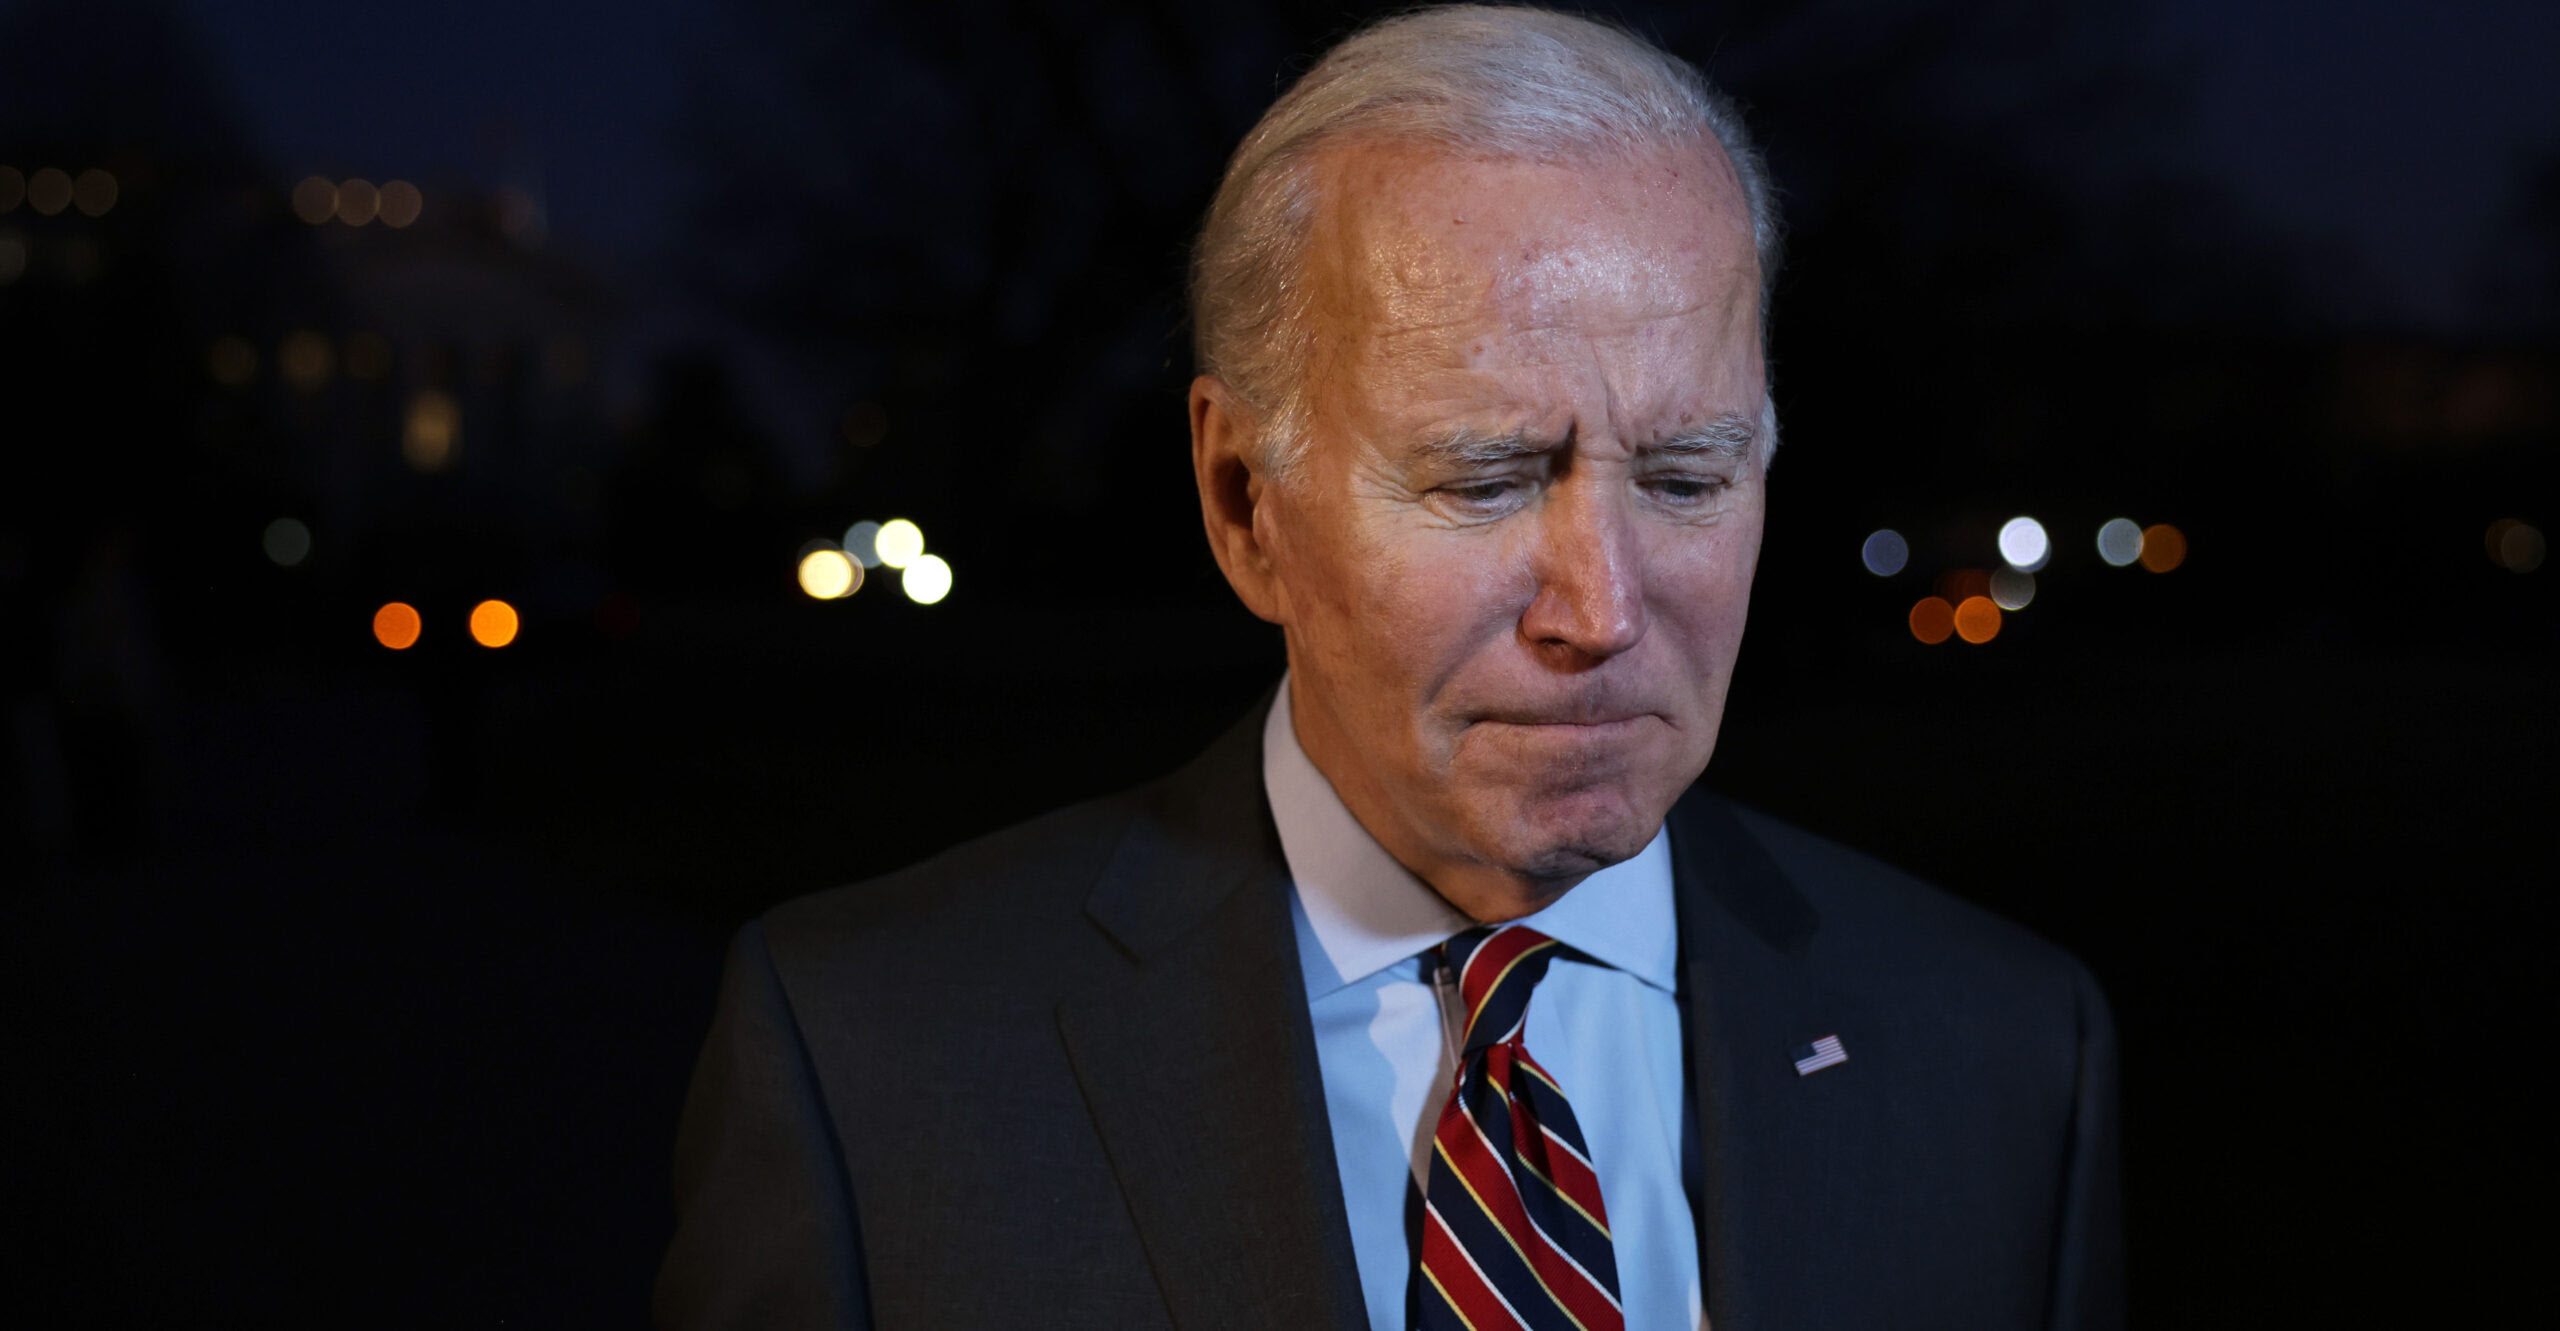 Justice Department Searching Biden's Delaware Home Amid Classified Documents Scandal